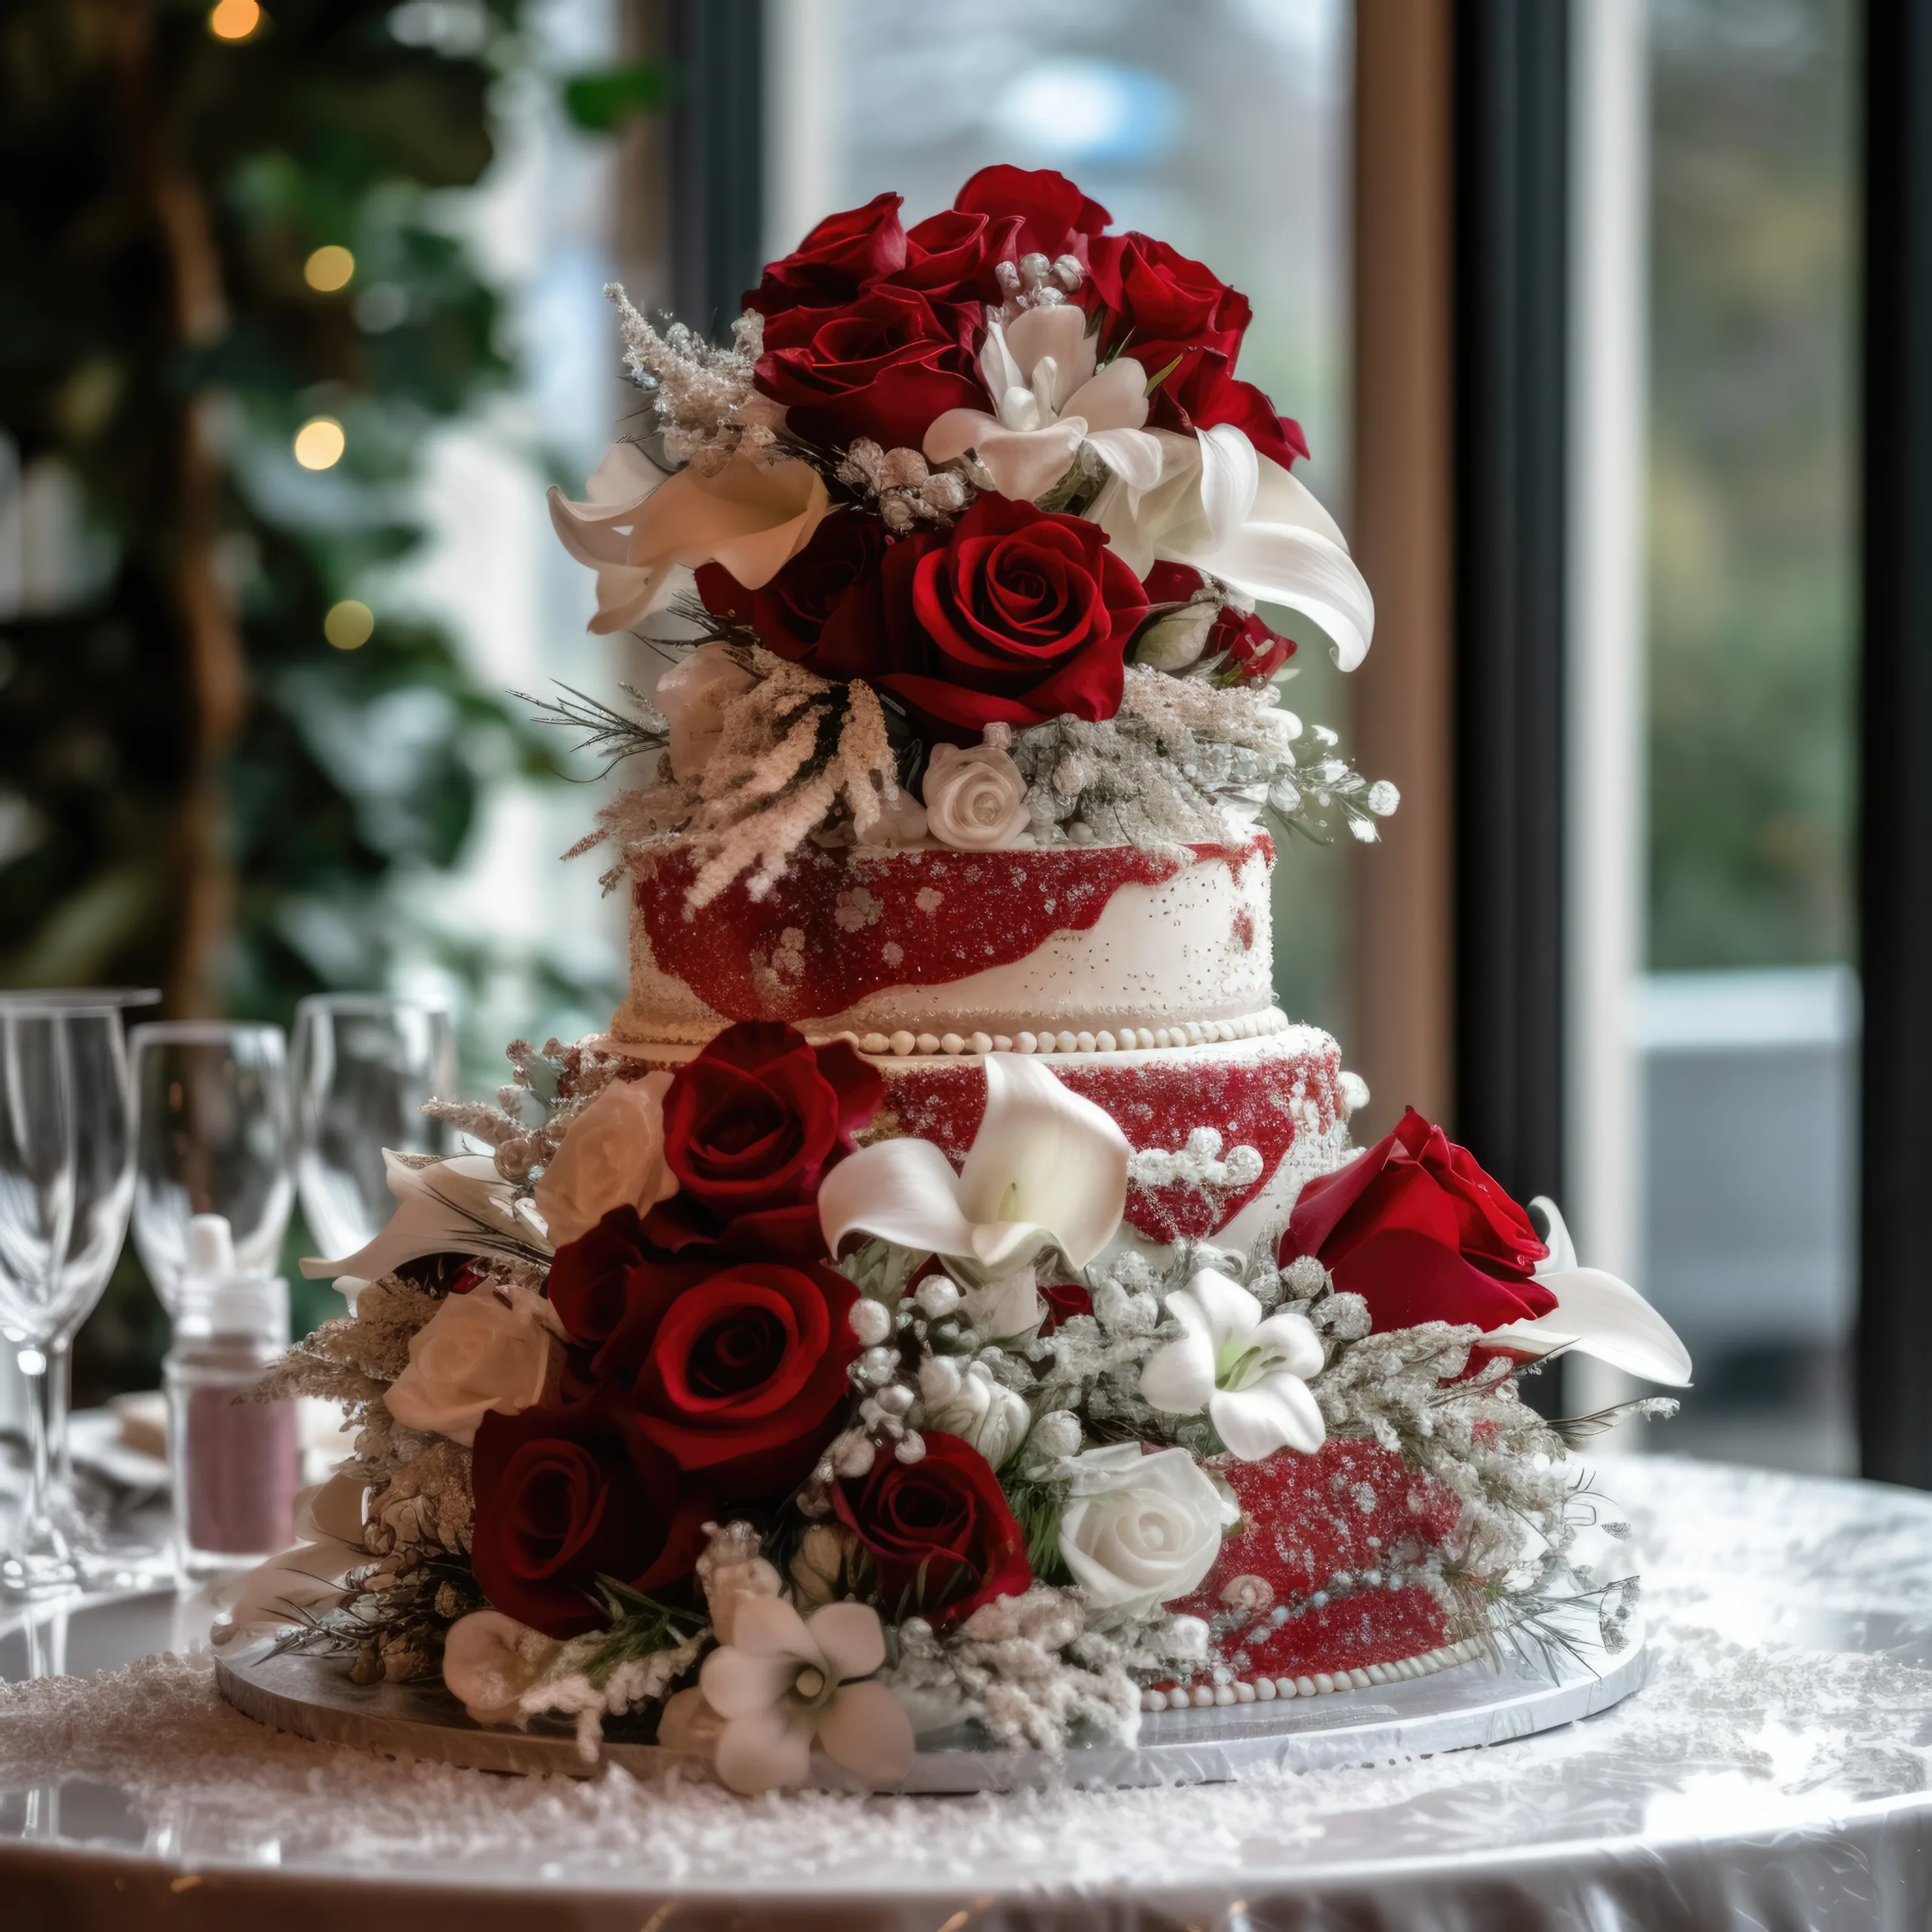 Photography at Wick farm: a red and white wedding cake on a table.